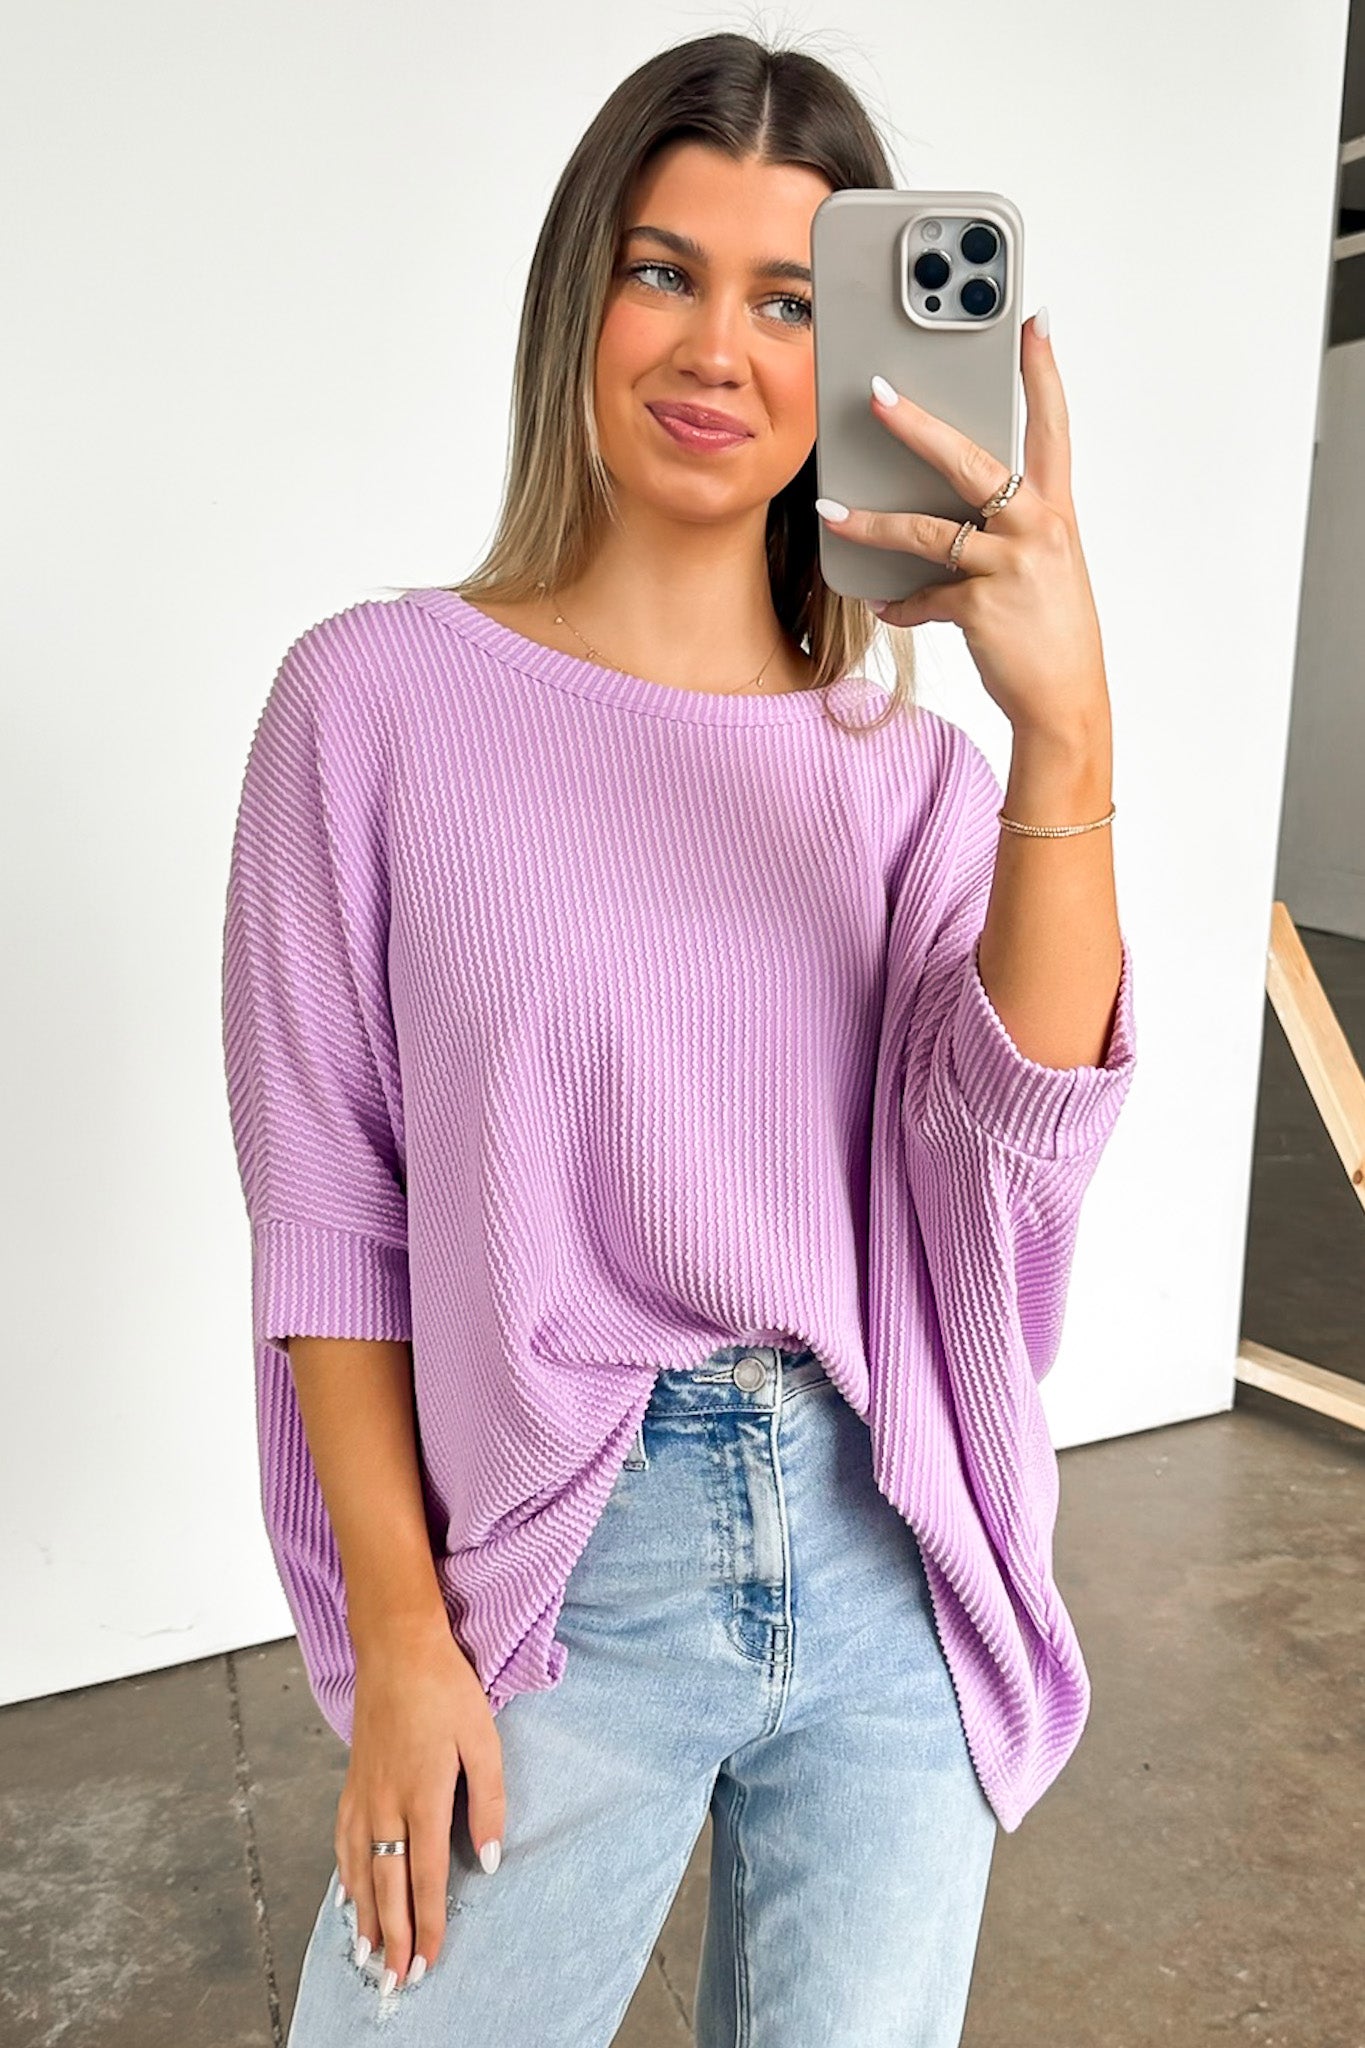  Meyers Rib Knit Relaxed Tunic Top - BACK IN STOCK - Madison and Mallory